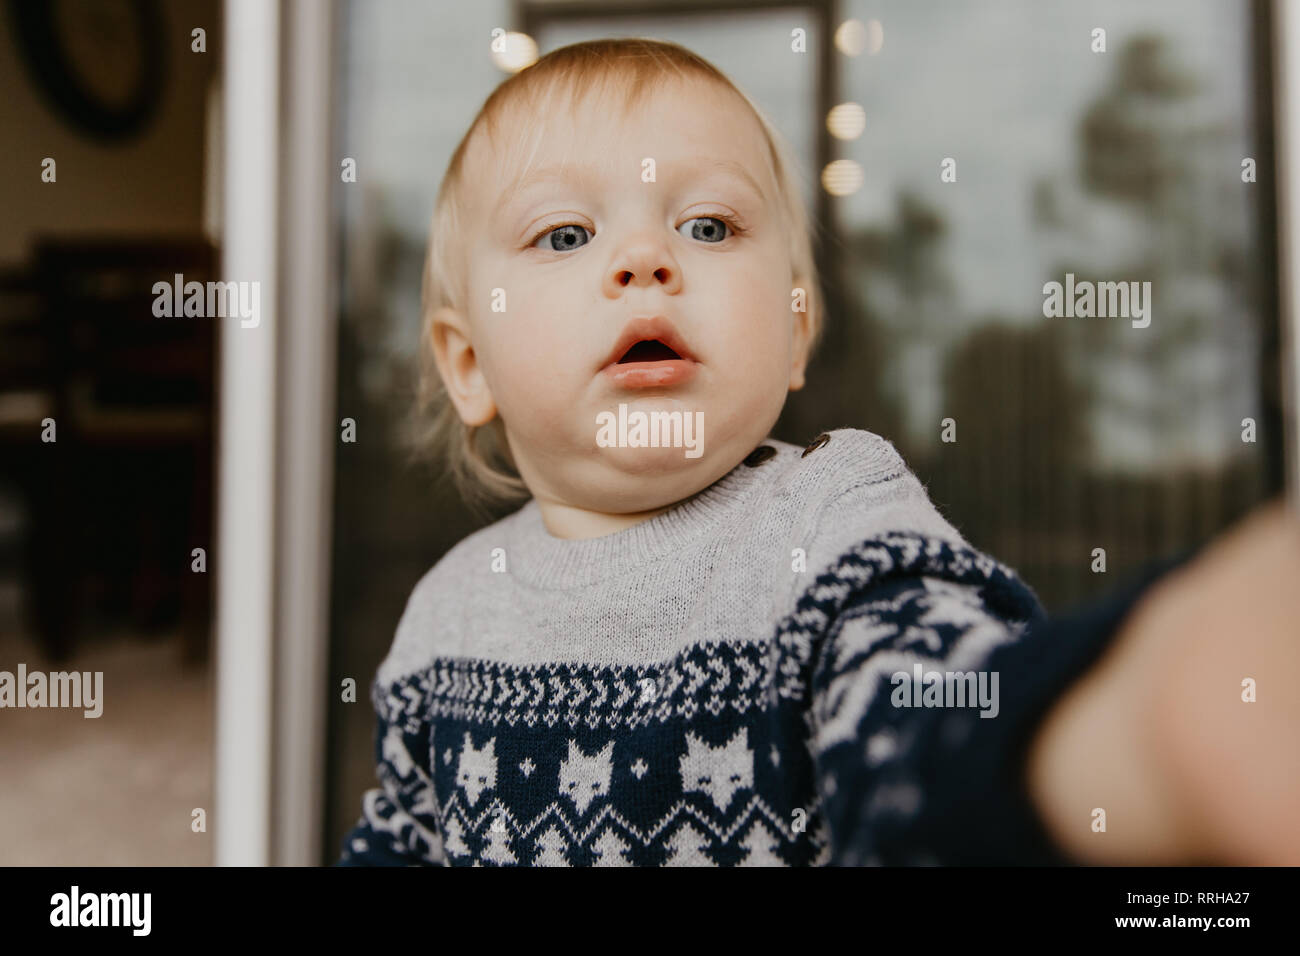 Cute Adorable Little Blonde Toddler Kid Laughing, Having Fun, and Making Silly Faces Outside at Home on the Patio Screened  Porch Stock Photo